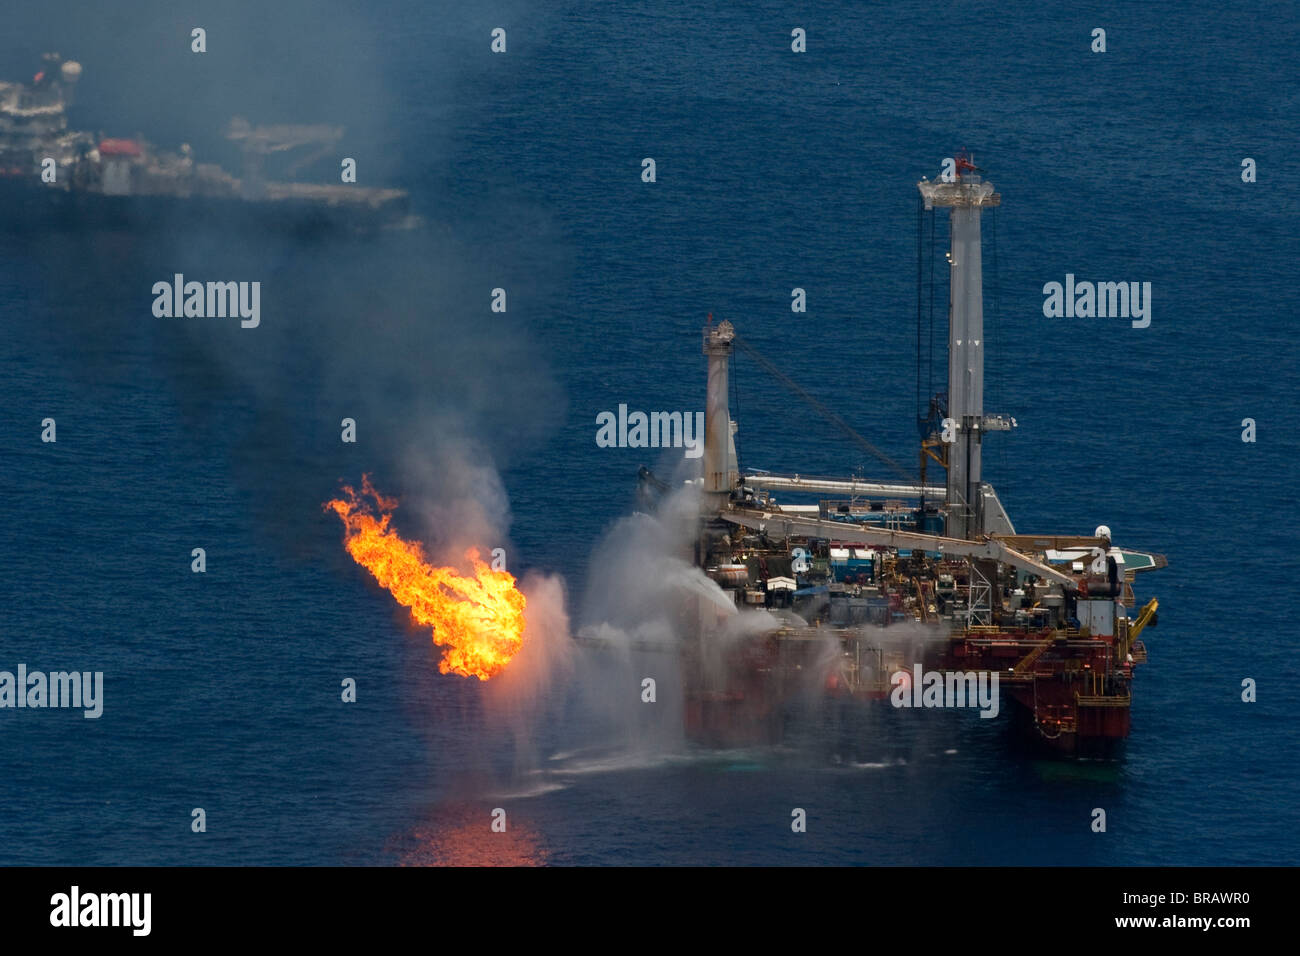 Drilling ships at the site of the BP Deepwater Horizon oil spill in the Gulf of Mexico recover oil and flare off gas. Stock Photo